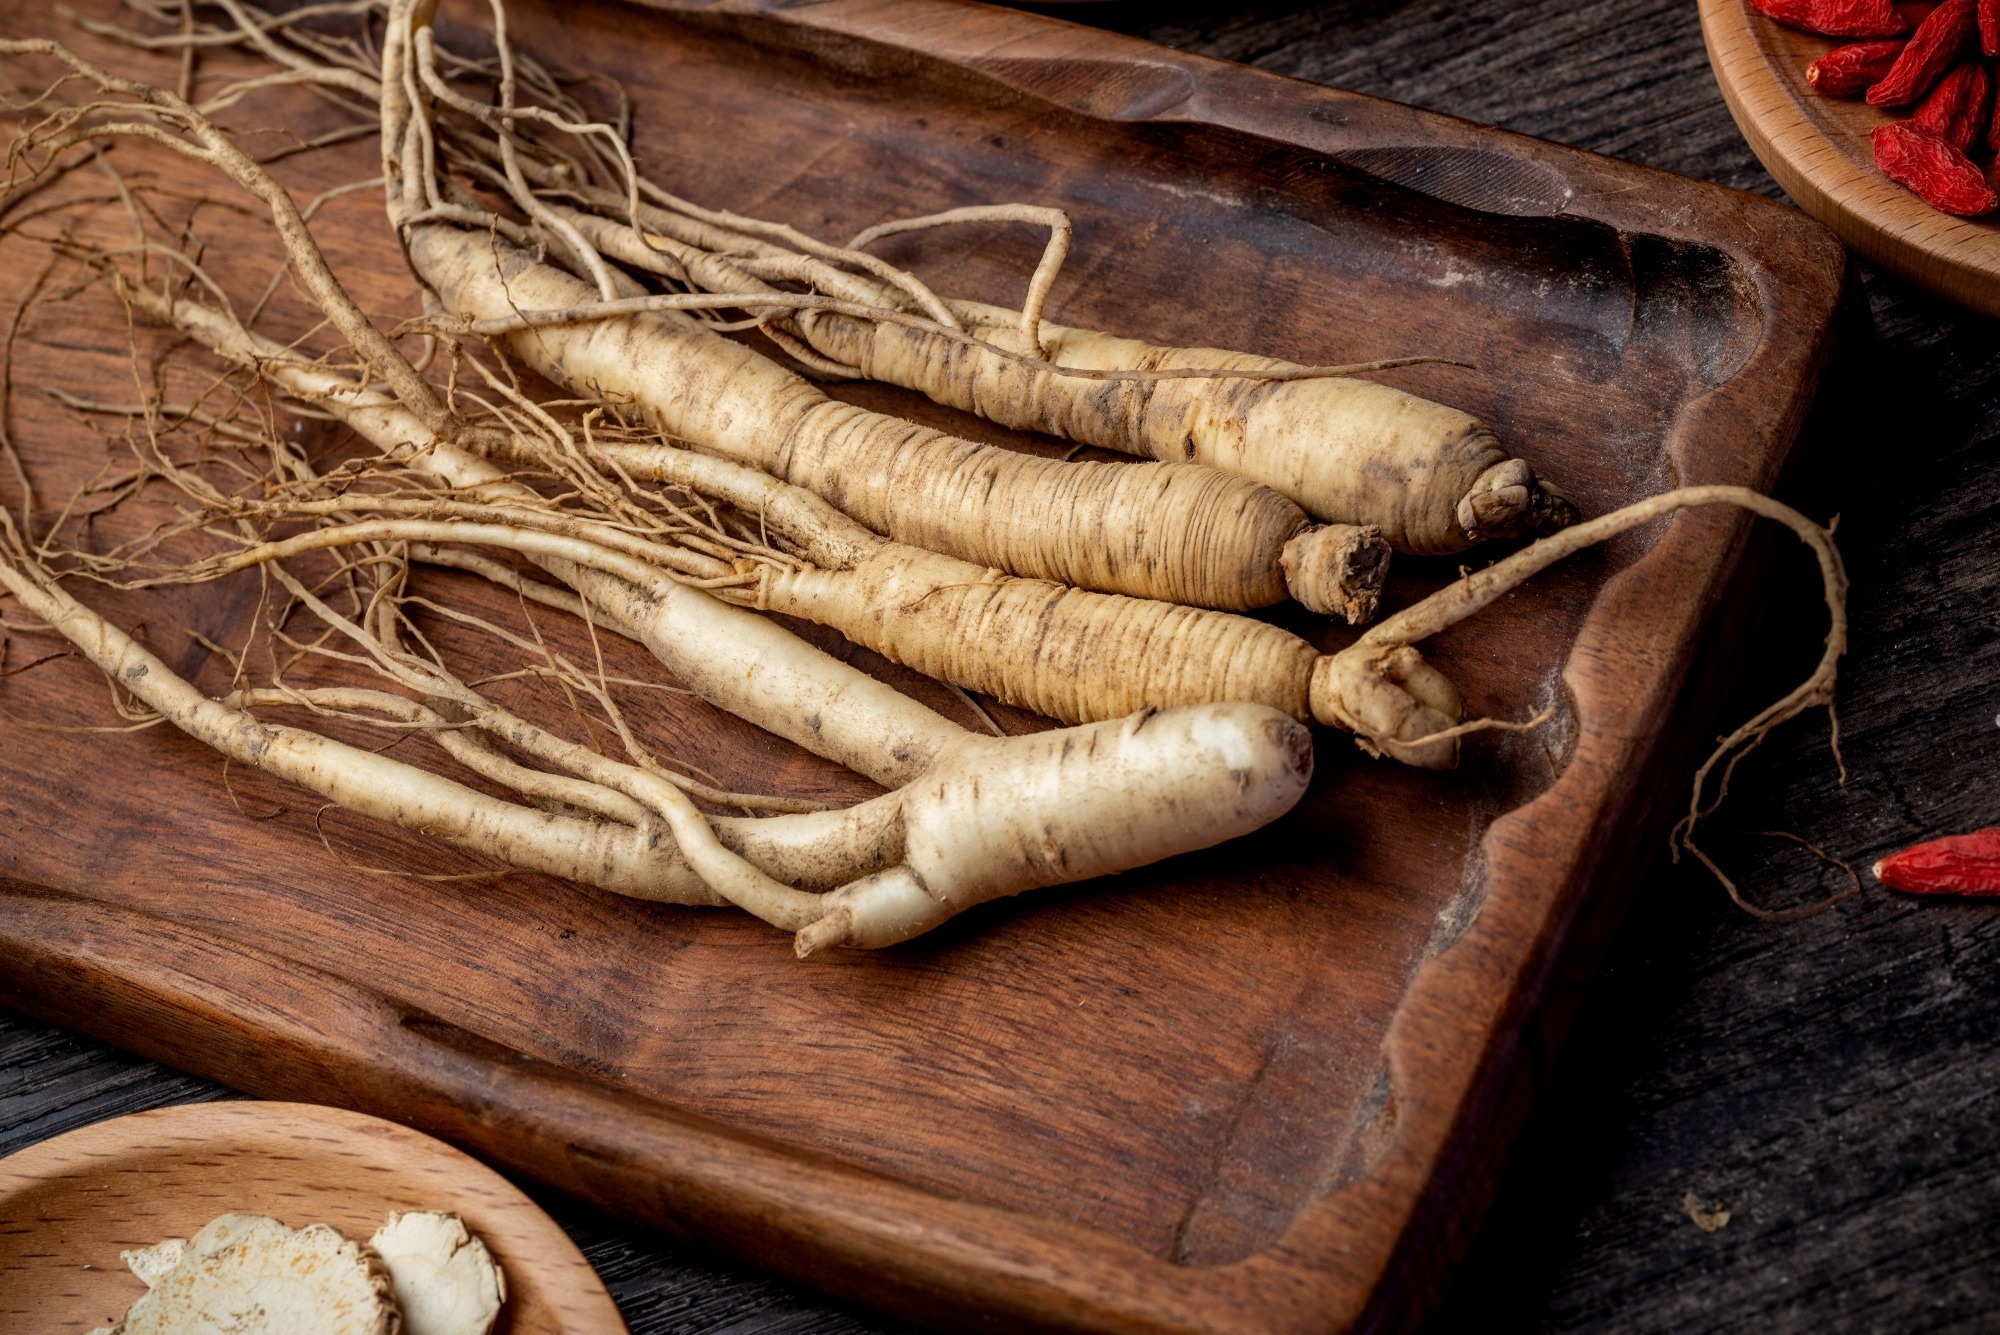 Study: Panax ginseng as a potential therapeutic for neurological disorders associated with COVID-19; Toward targeting inflammasome. Image Credit: QinJin/Shutterstock